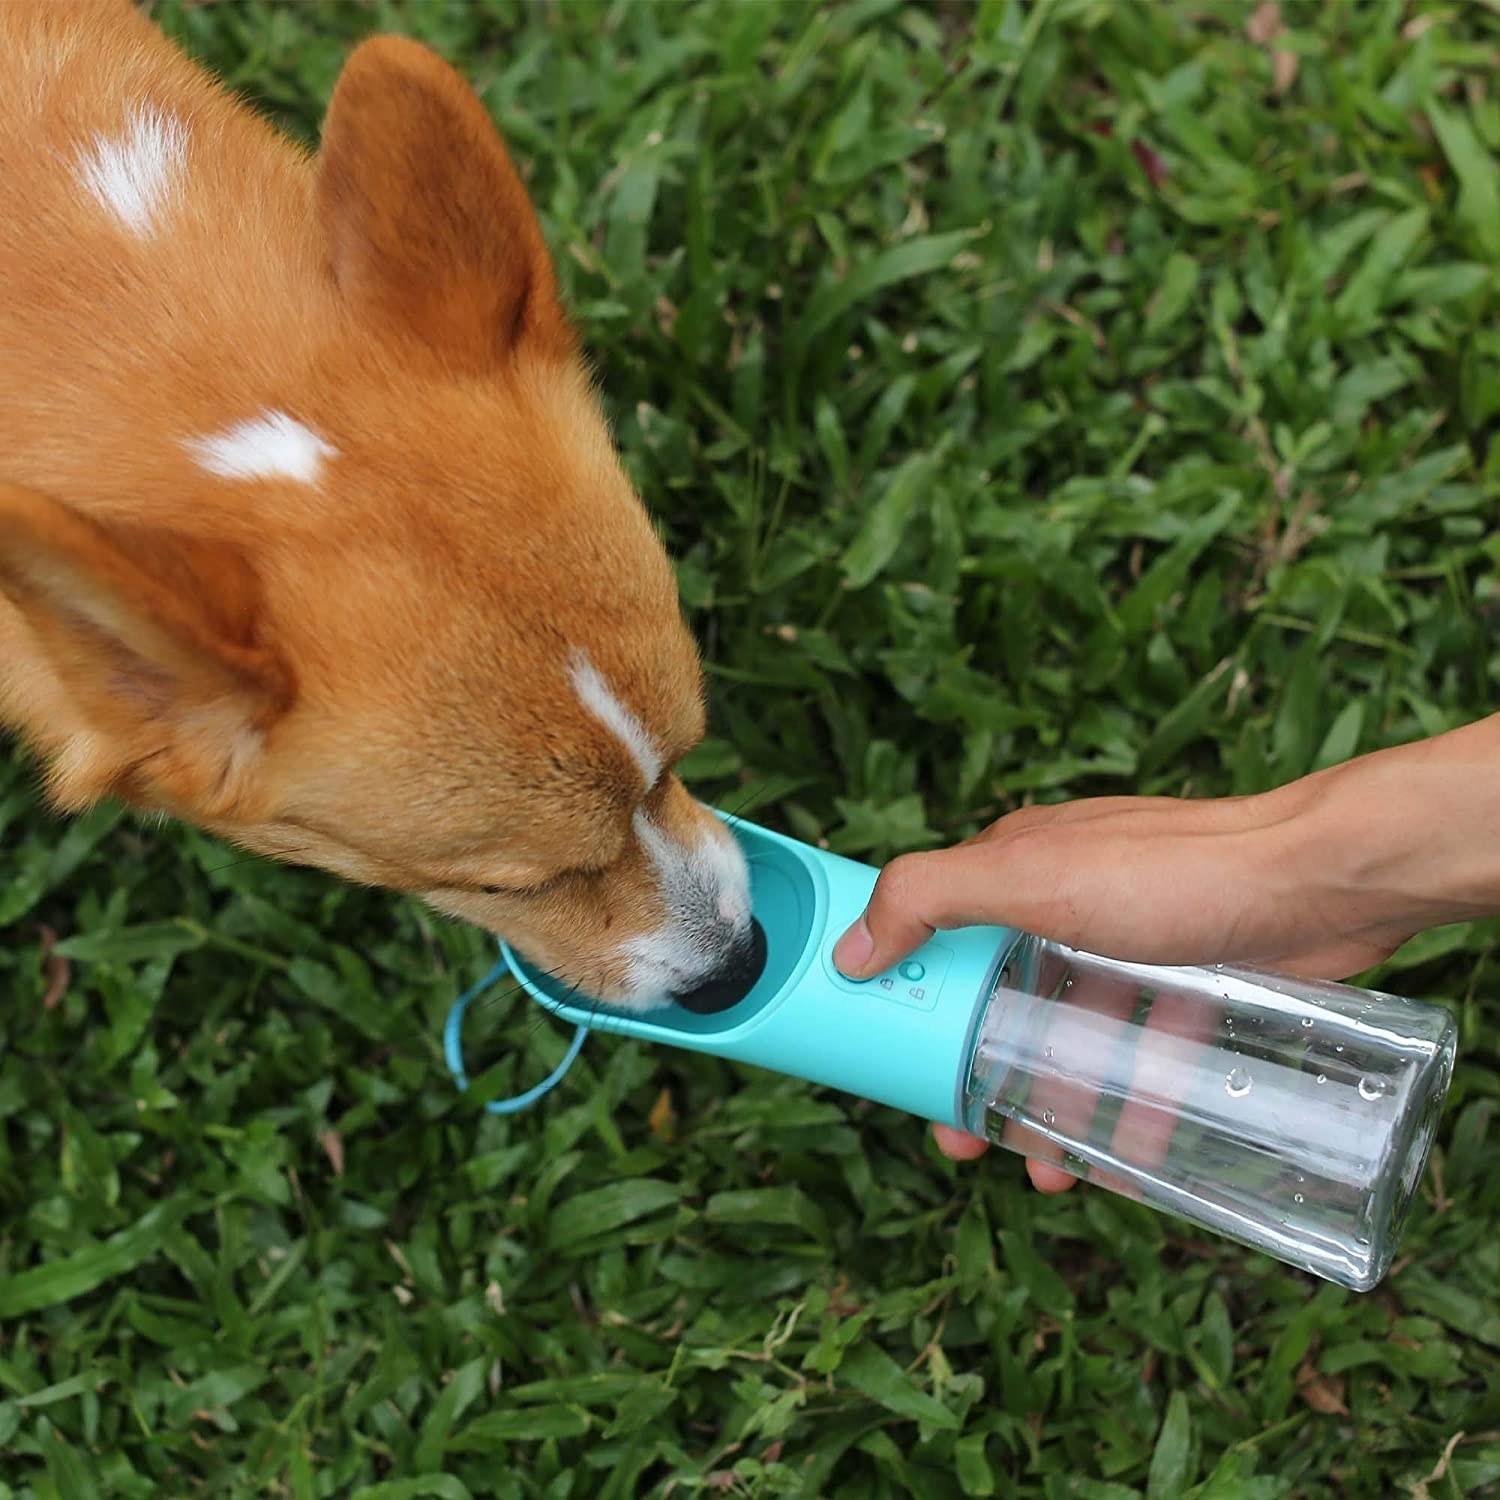 a dog drinking from the water bottle